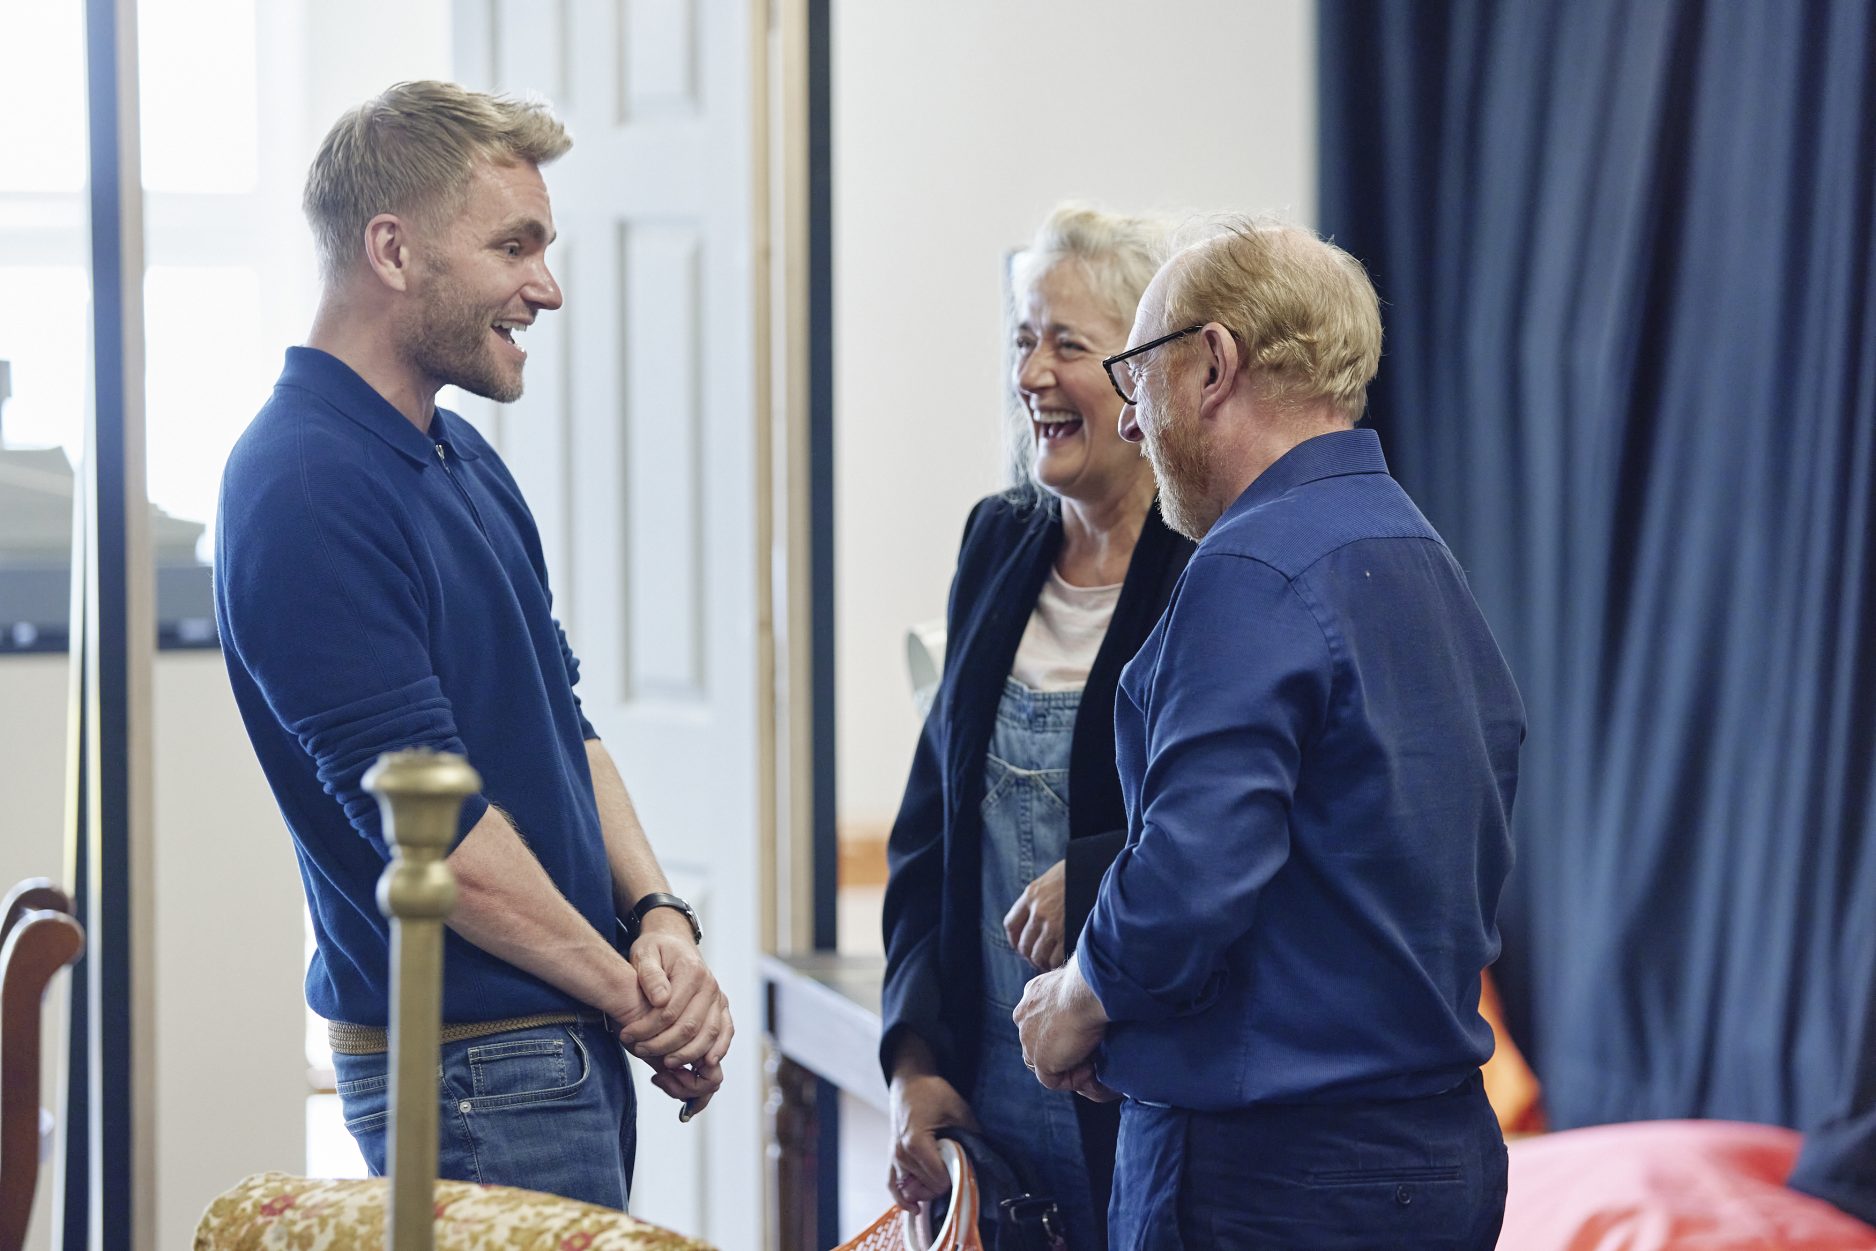 Adam Penford, Adrian Scarborough & Sophie Thompson in rehearsal for TCTSUI © Nottingham Playhouse 